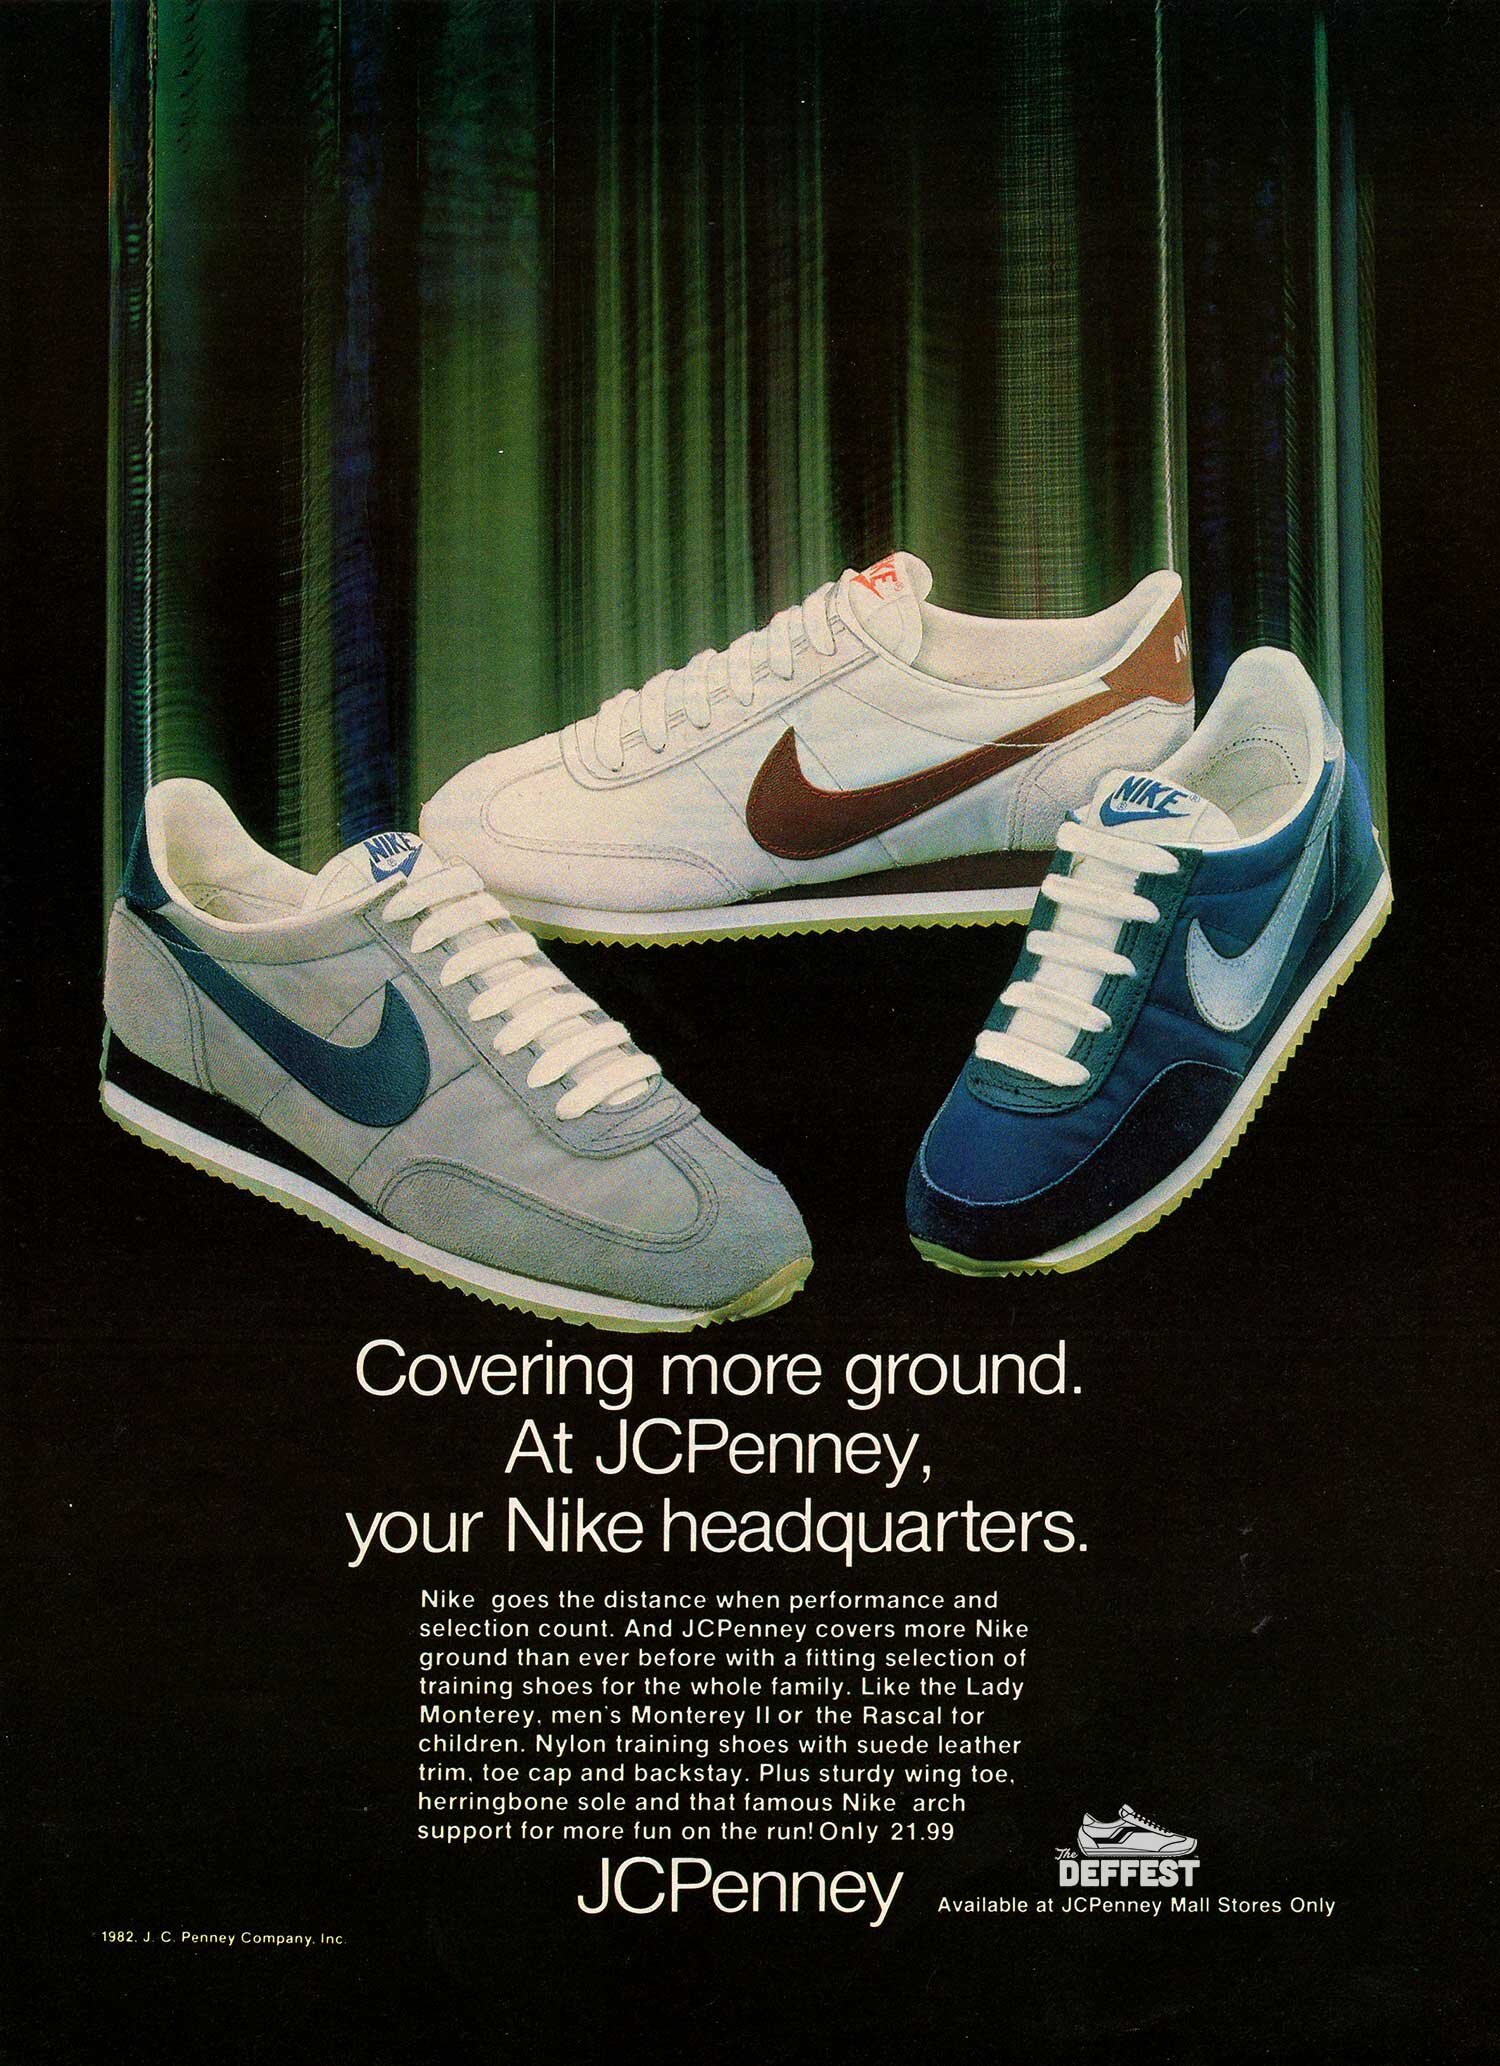 Nike — The Deffest®. vintage and retro sneaker blog. — Ads